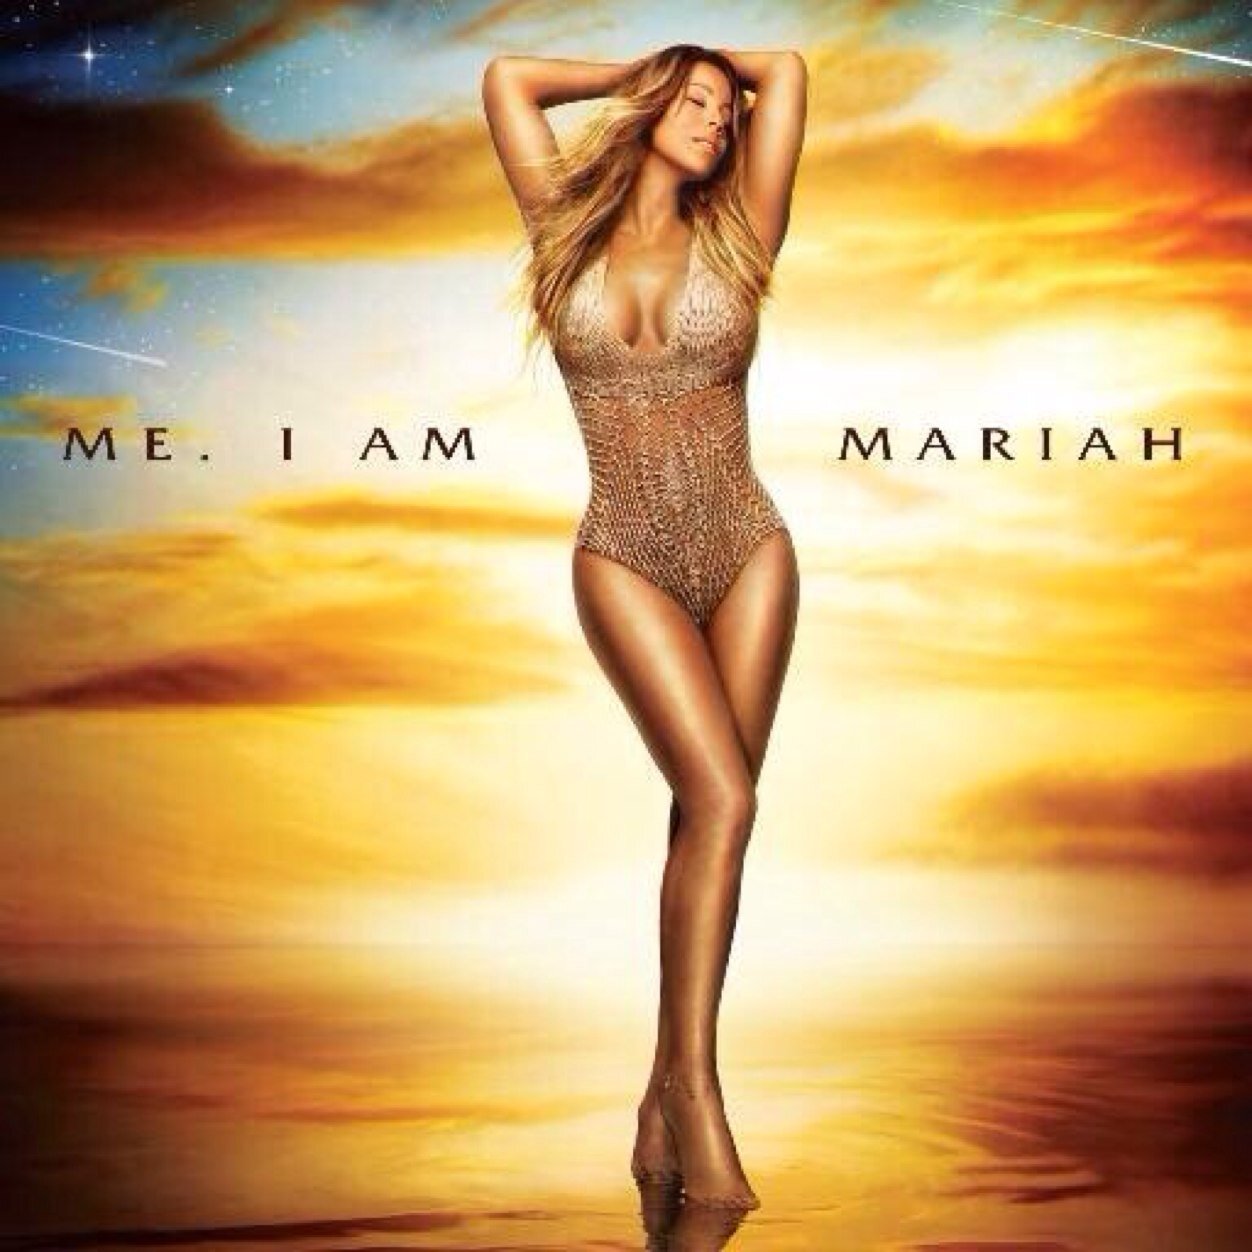 Here with everlasting support for the one and only Mariah Carey. Much love for the Lambily. ❤️